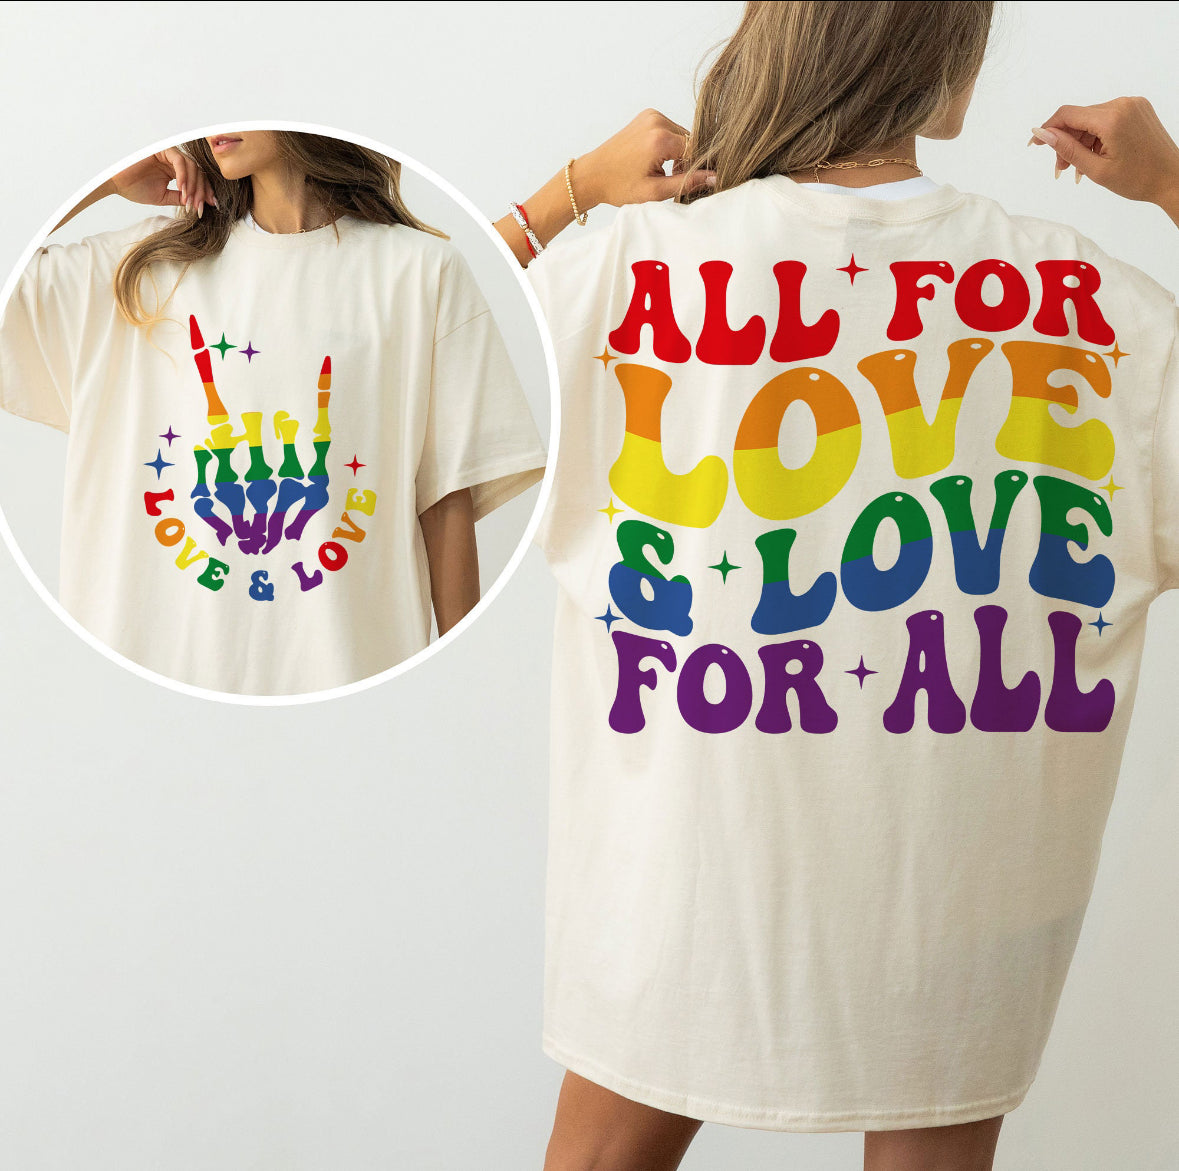 All for love and love for all Shirts